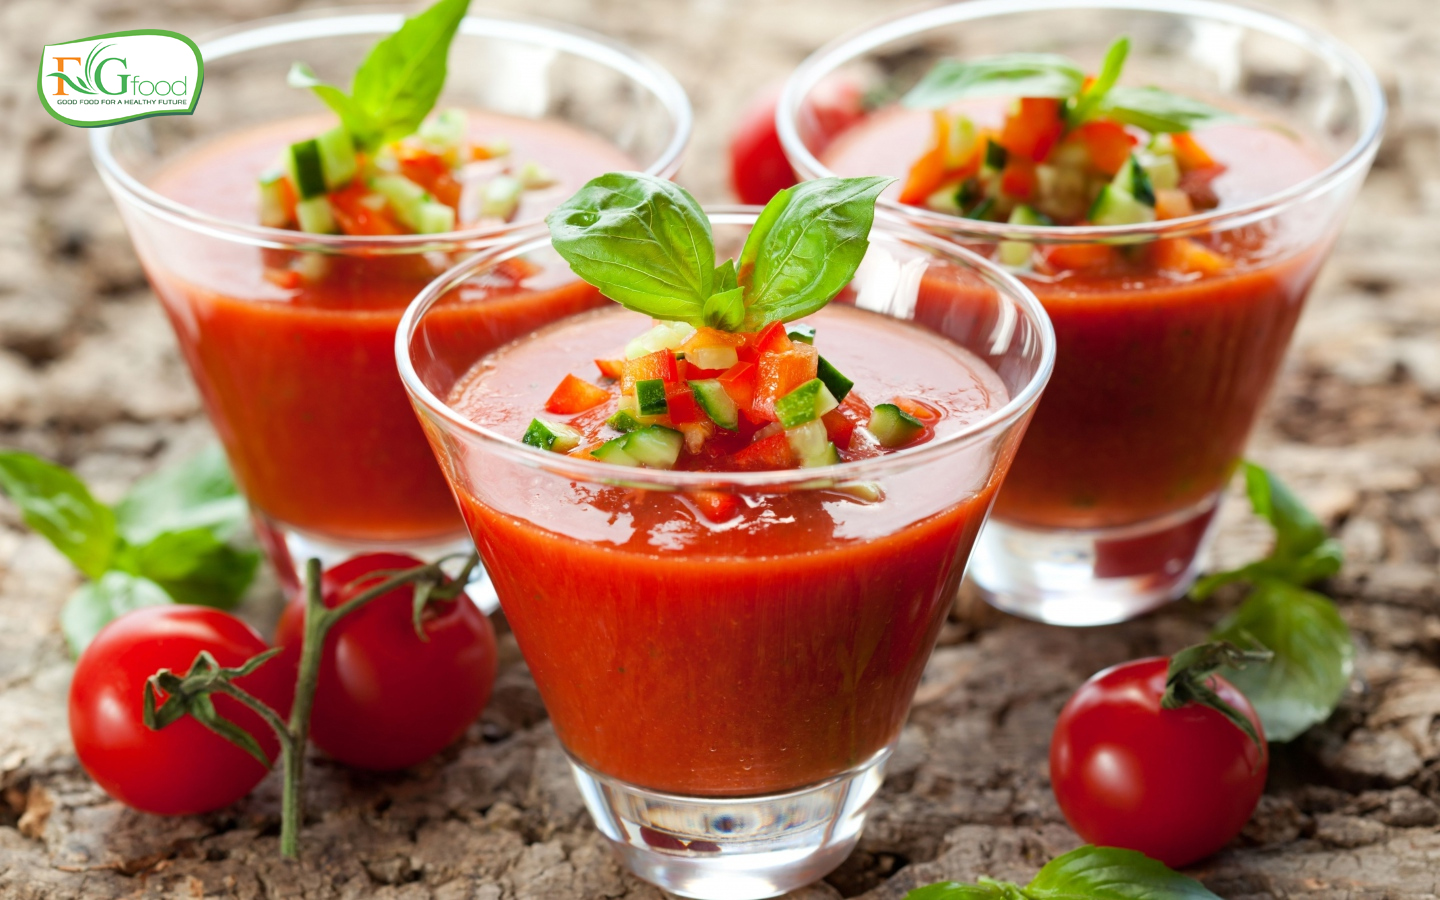 Tomato Weight Loss – Tomato Juice for Weight Loss Naturally